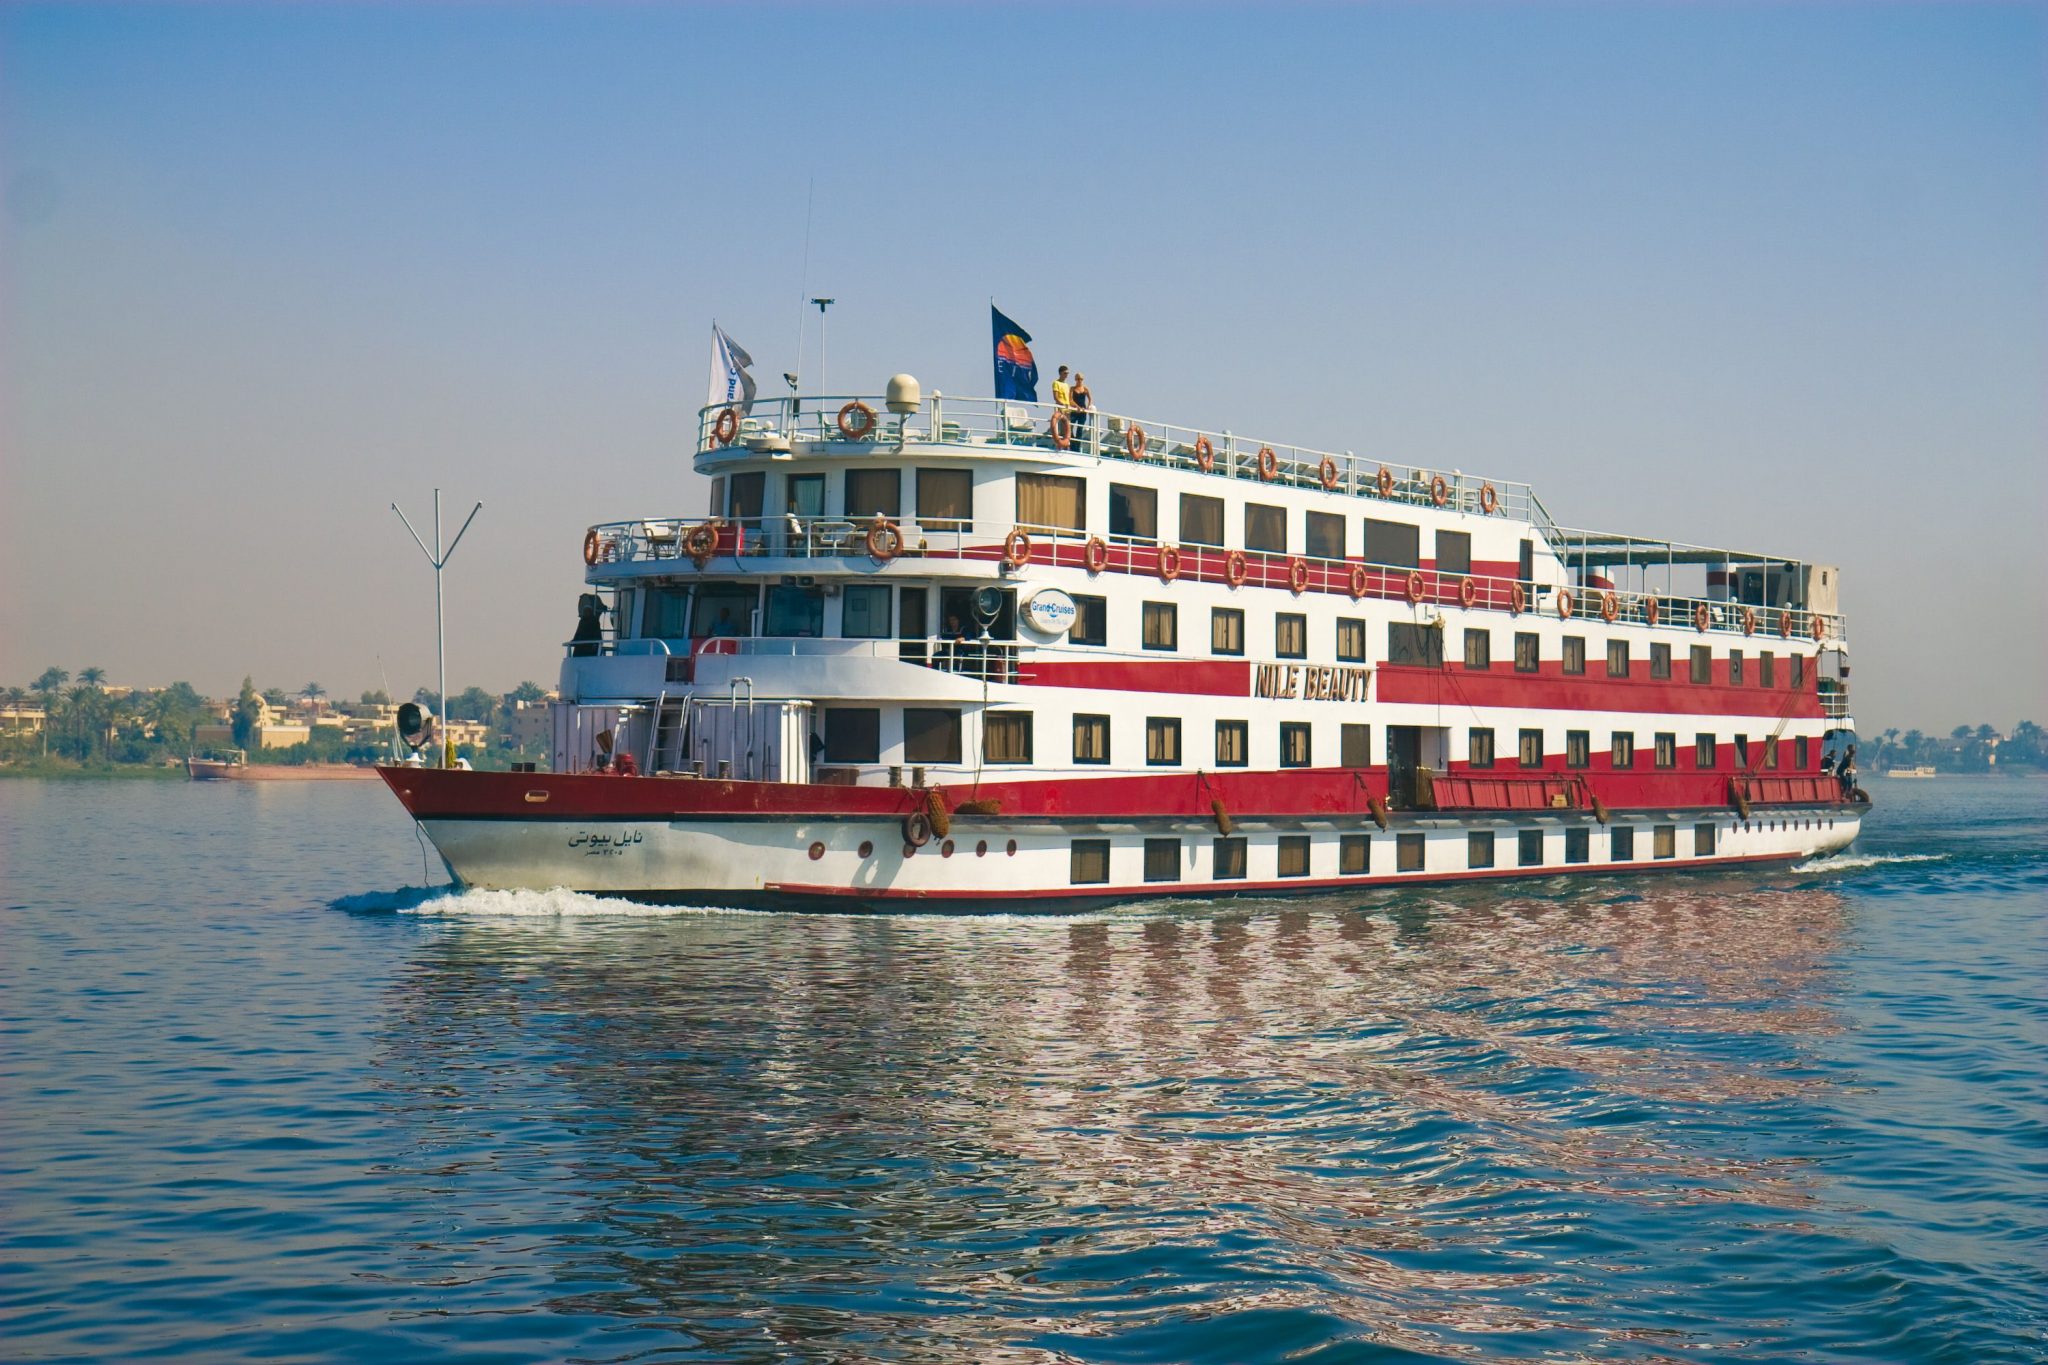 is nile river cruise safe